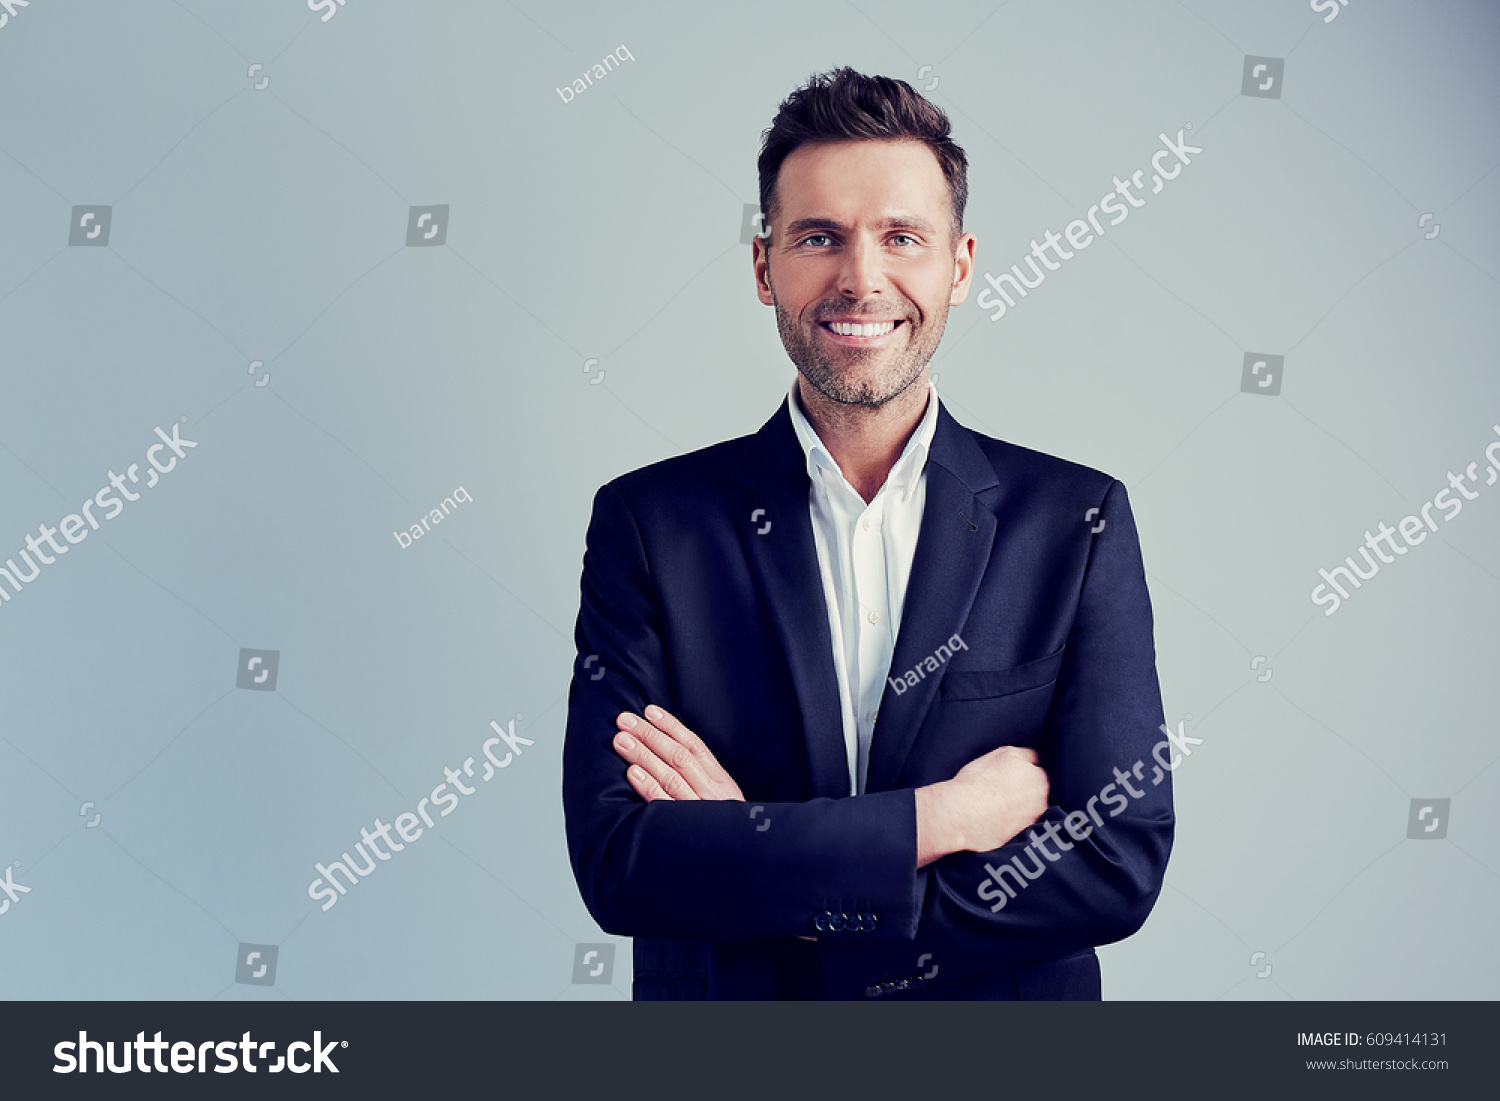 Happy businessman isolated - handsome man standing with crossed arms #609414131